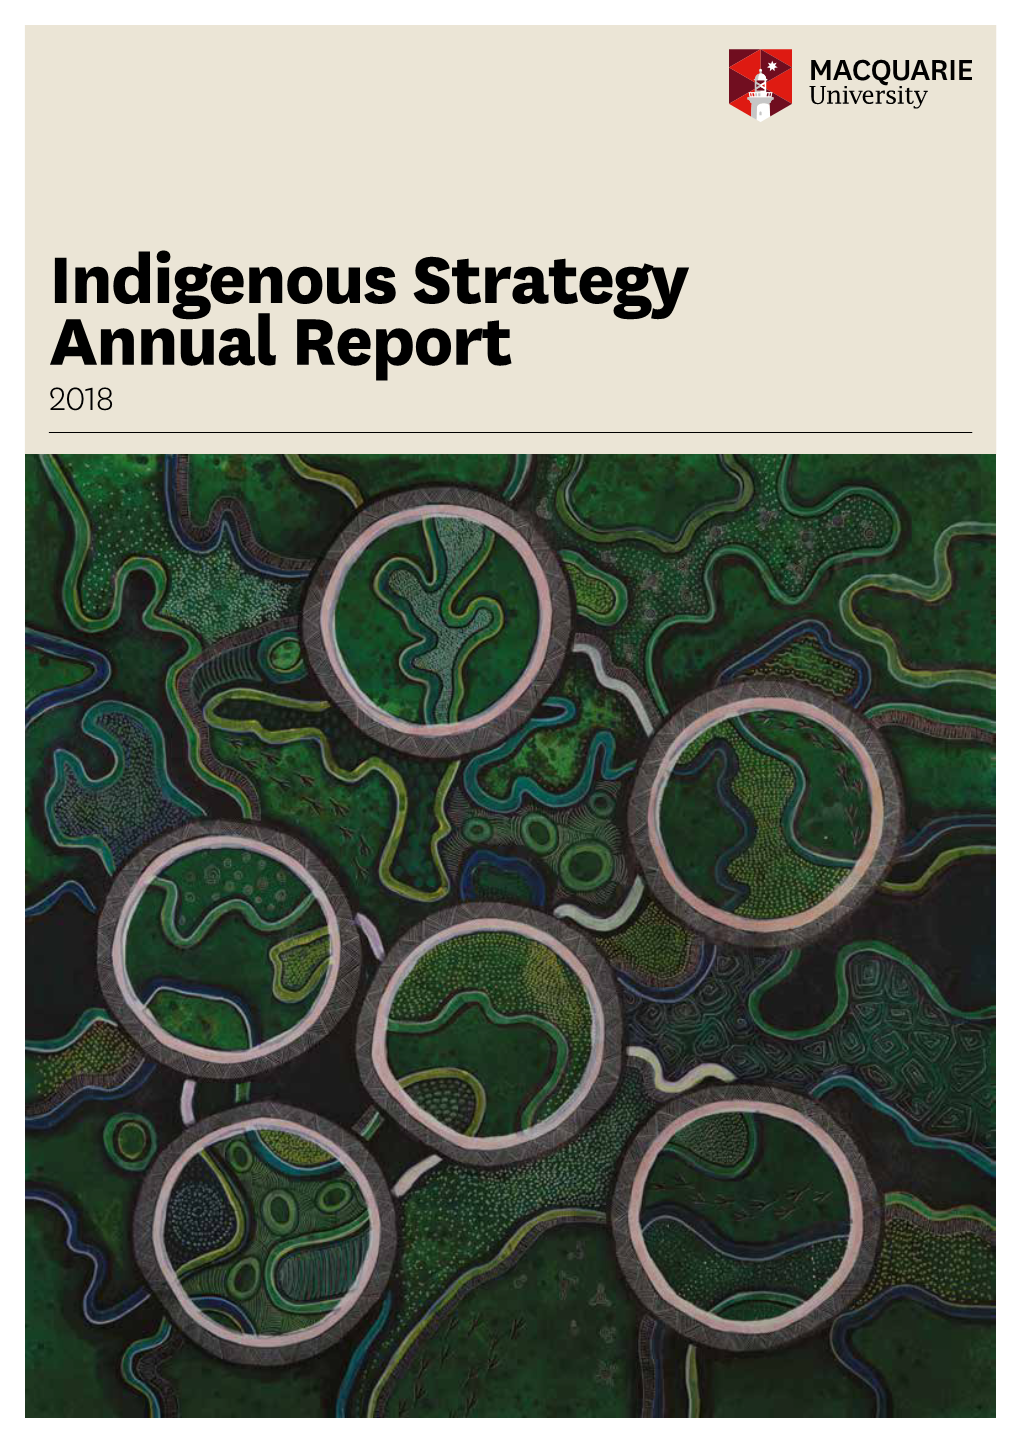 Indigenous Strategy Annual Report 2018 2 INDIGENOUS STRATEGY ANNUAL REPORT 2018 3